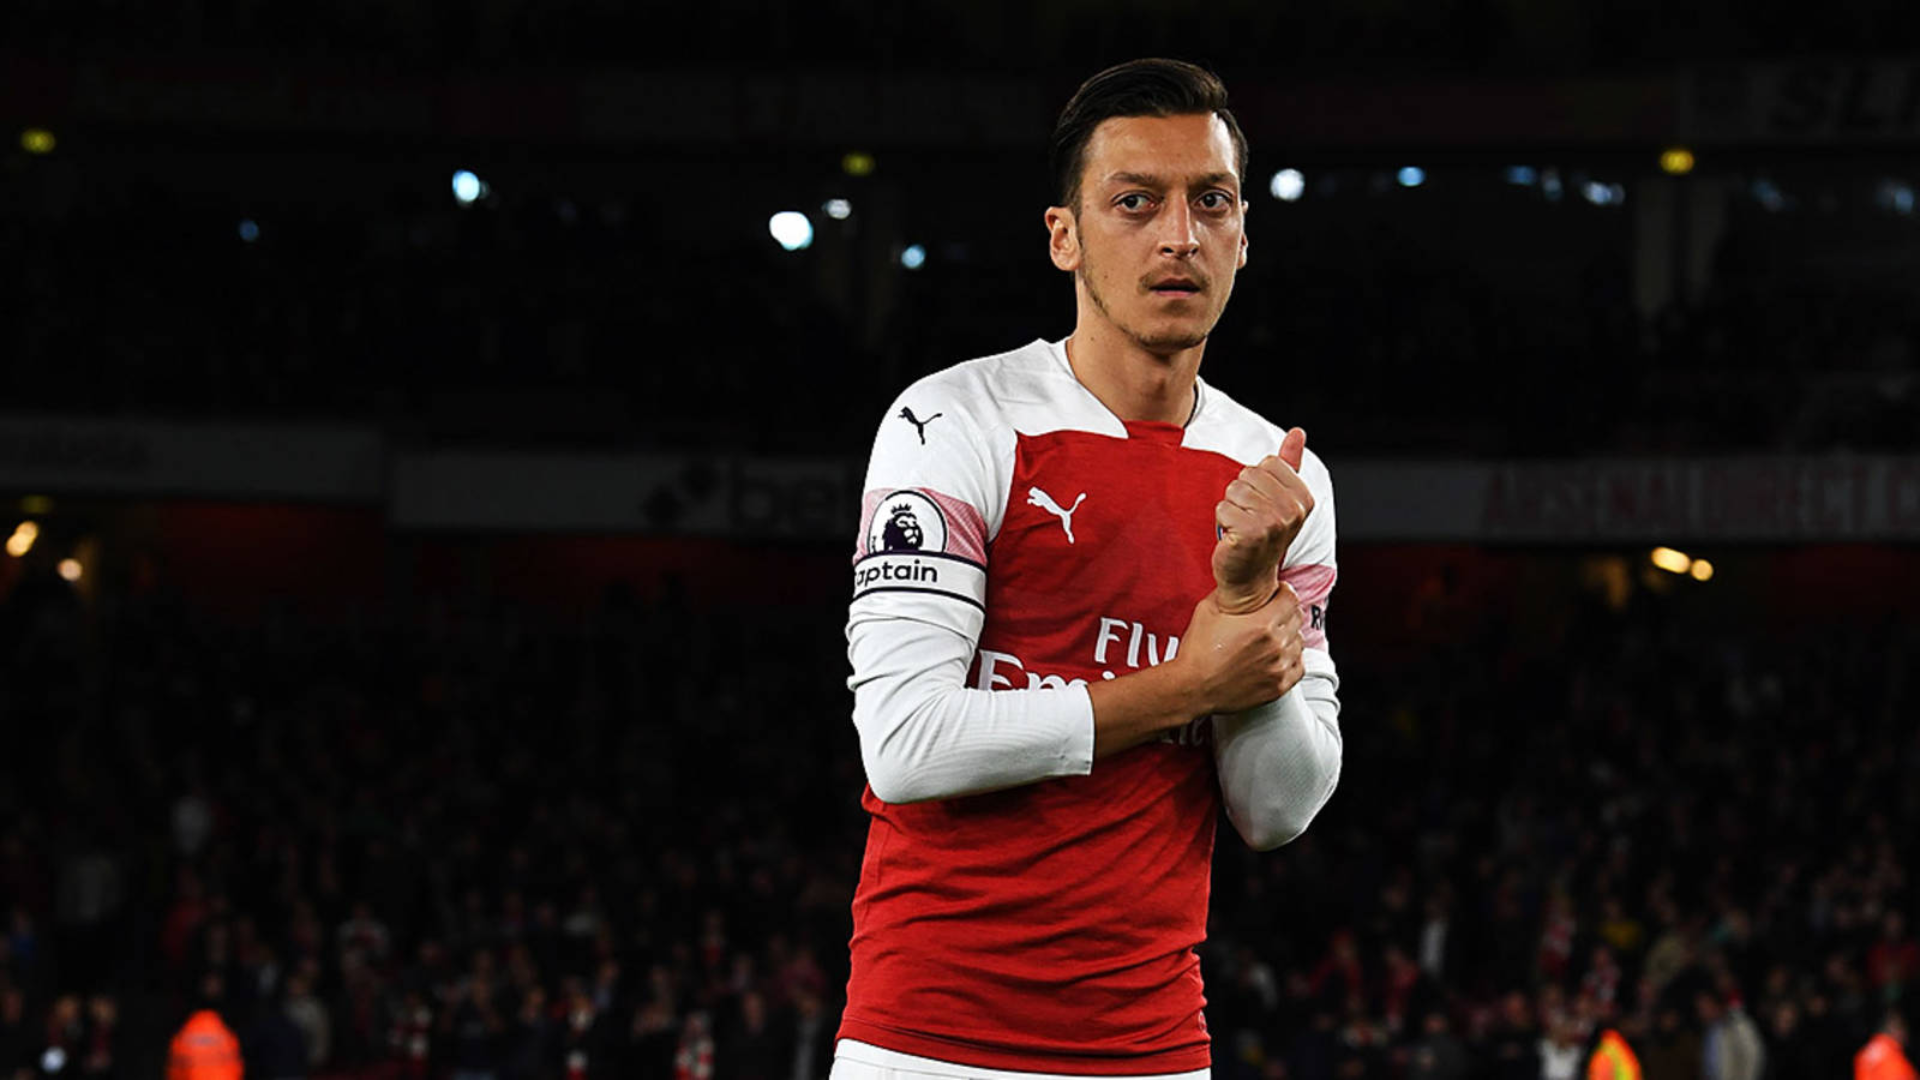 Mesut Ozil in Esports: Ex-Arsenal star responds to rumors of venturing into professional eSports upon retiring from football